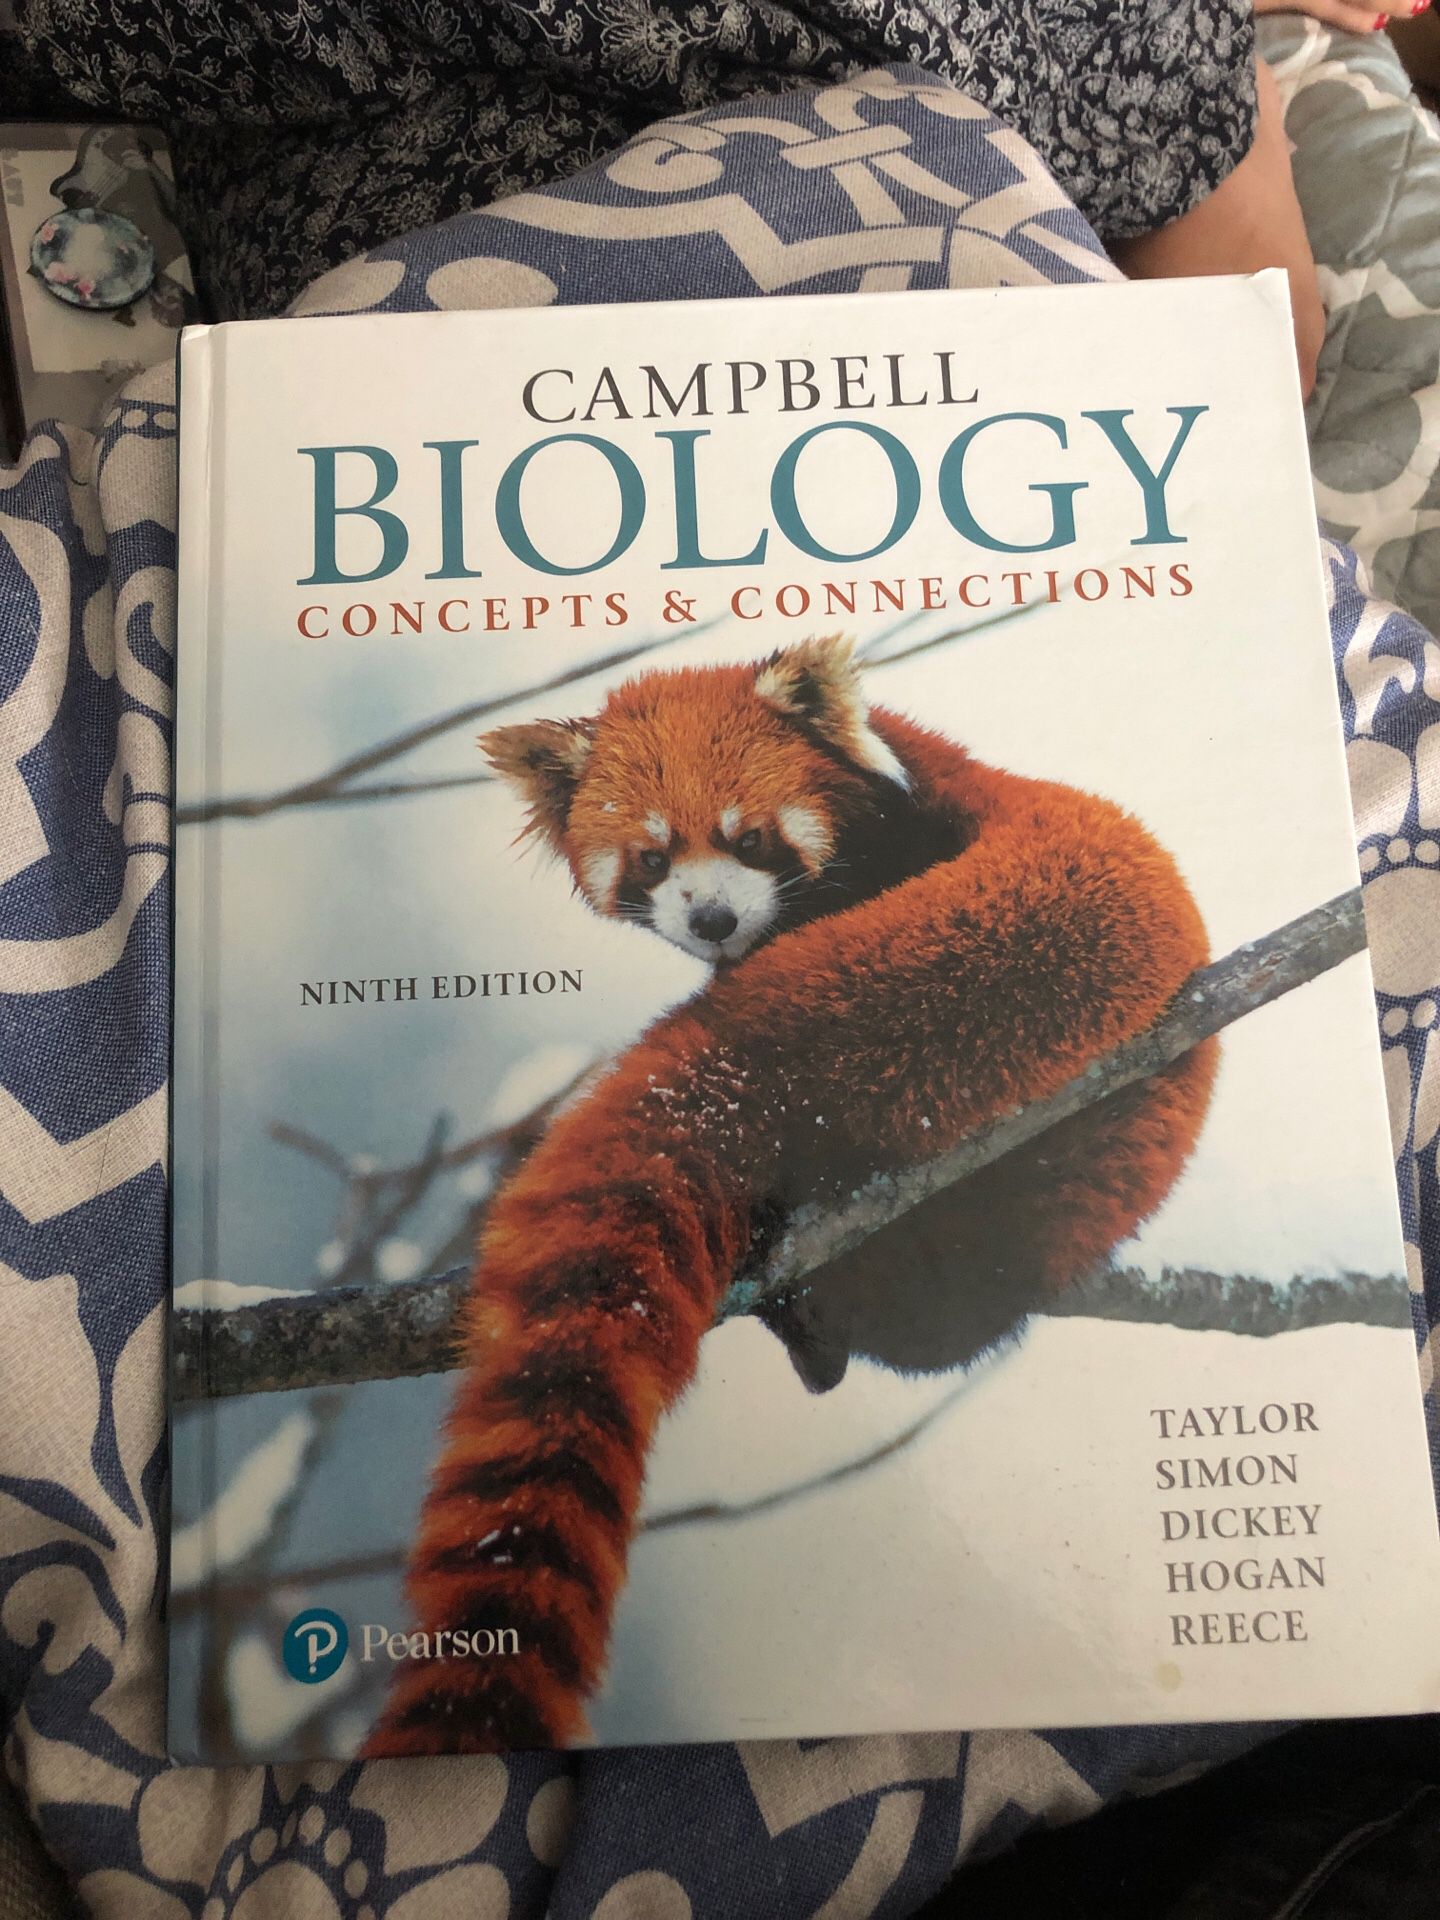 Campbell biology concept and connections 9th edition